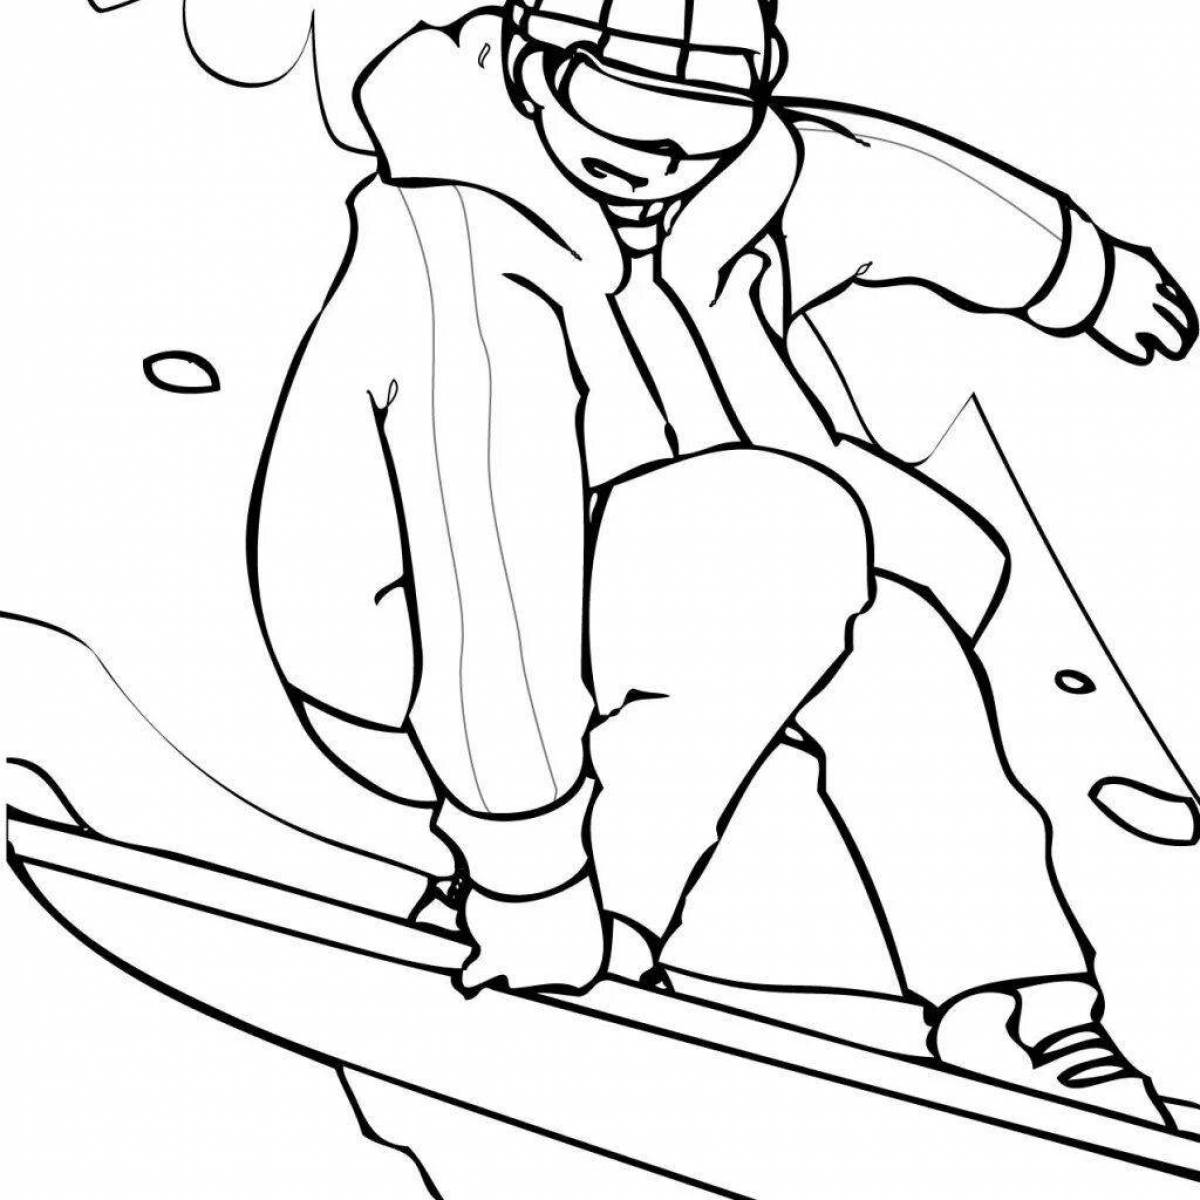 Coloring book magical luge